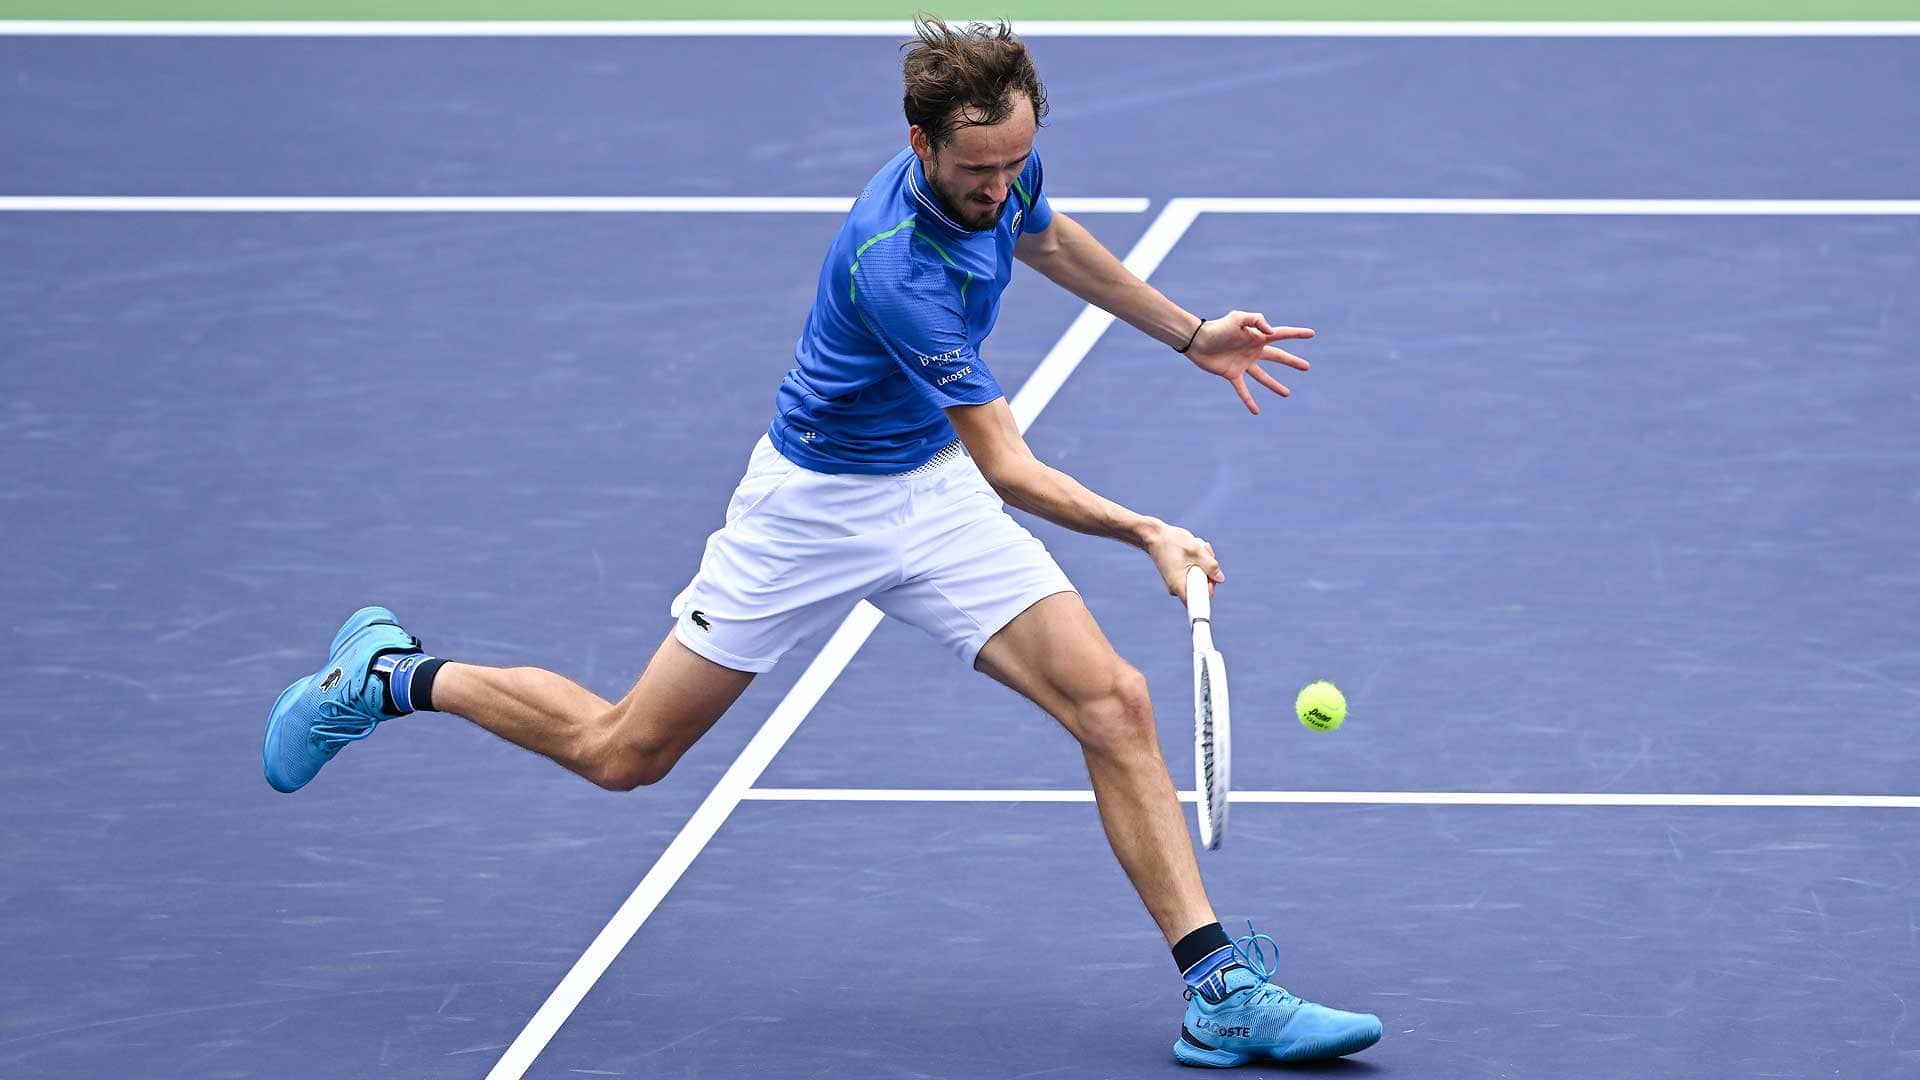 Daniil Medvedev has this year reached the quarter-finals of the BNP Paribas Open for the first time in his career.